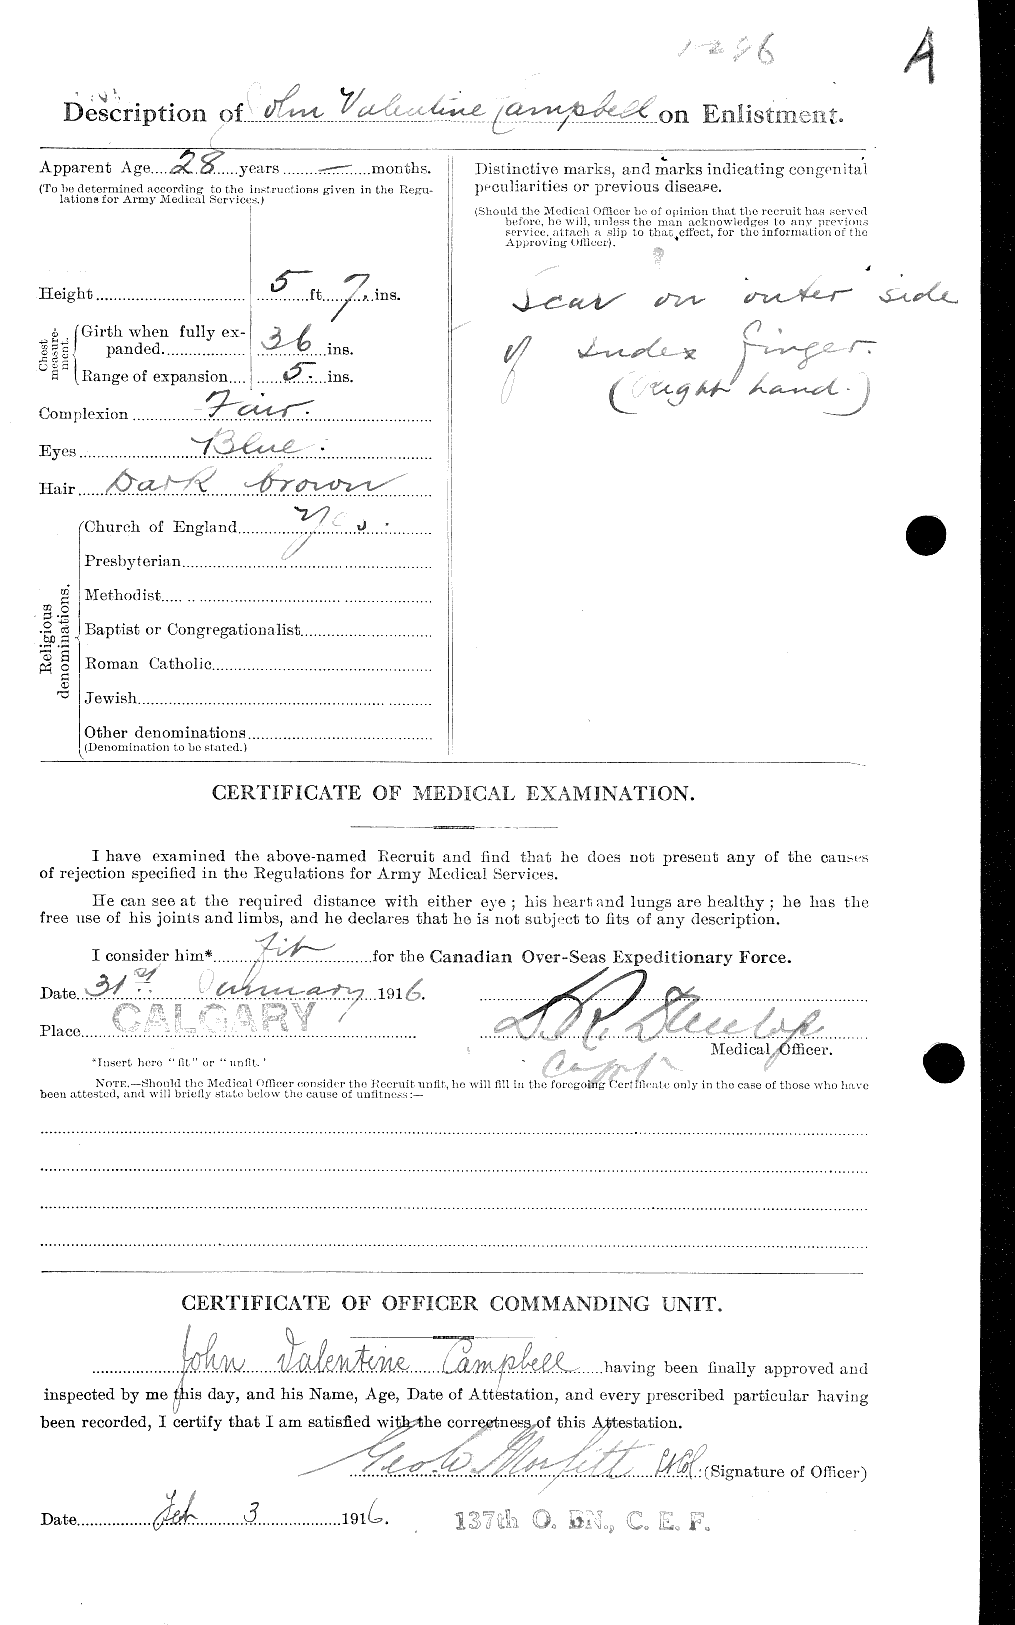 Personnel Records of the First World War - CEF 003797b